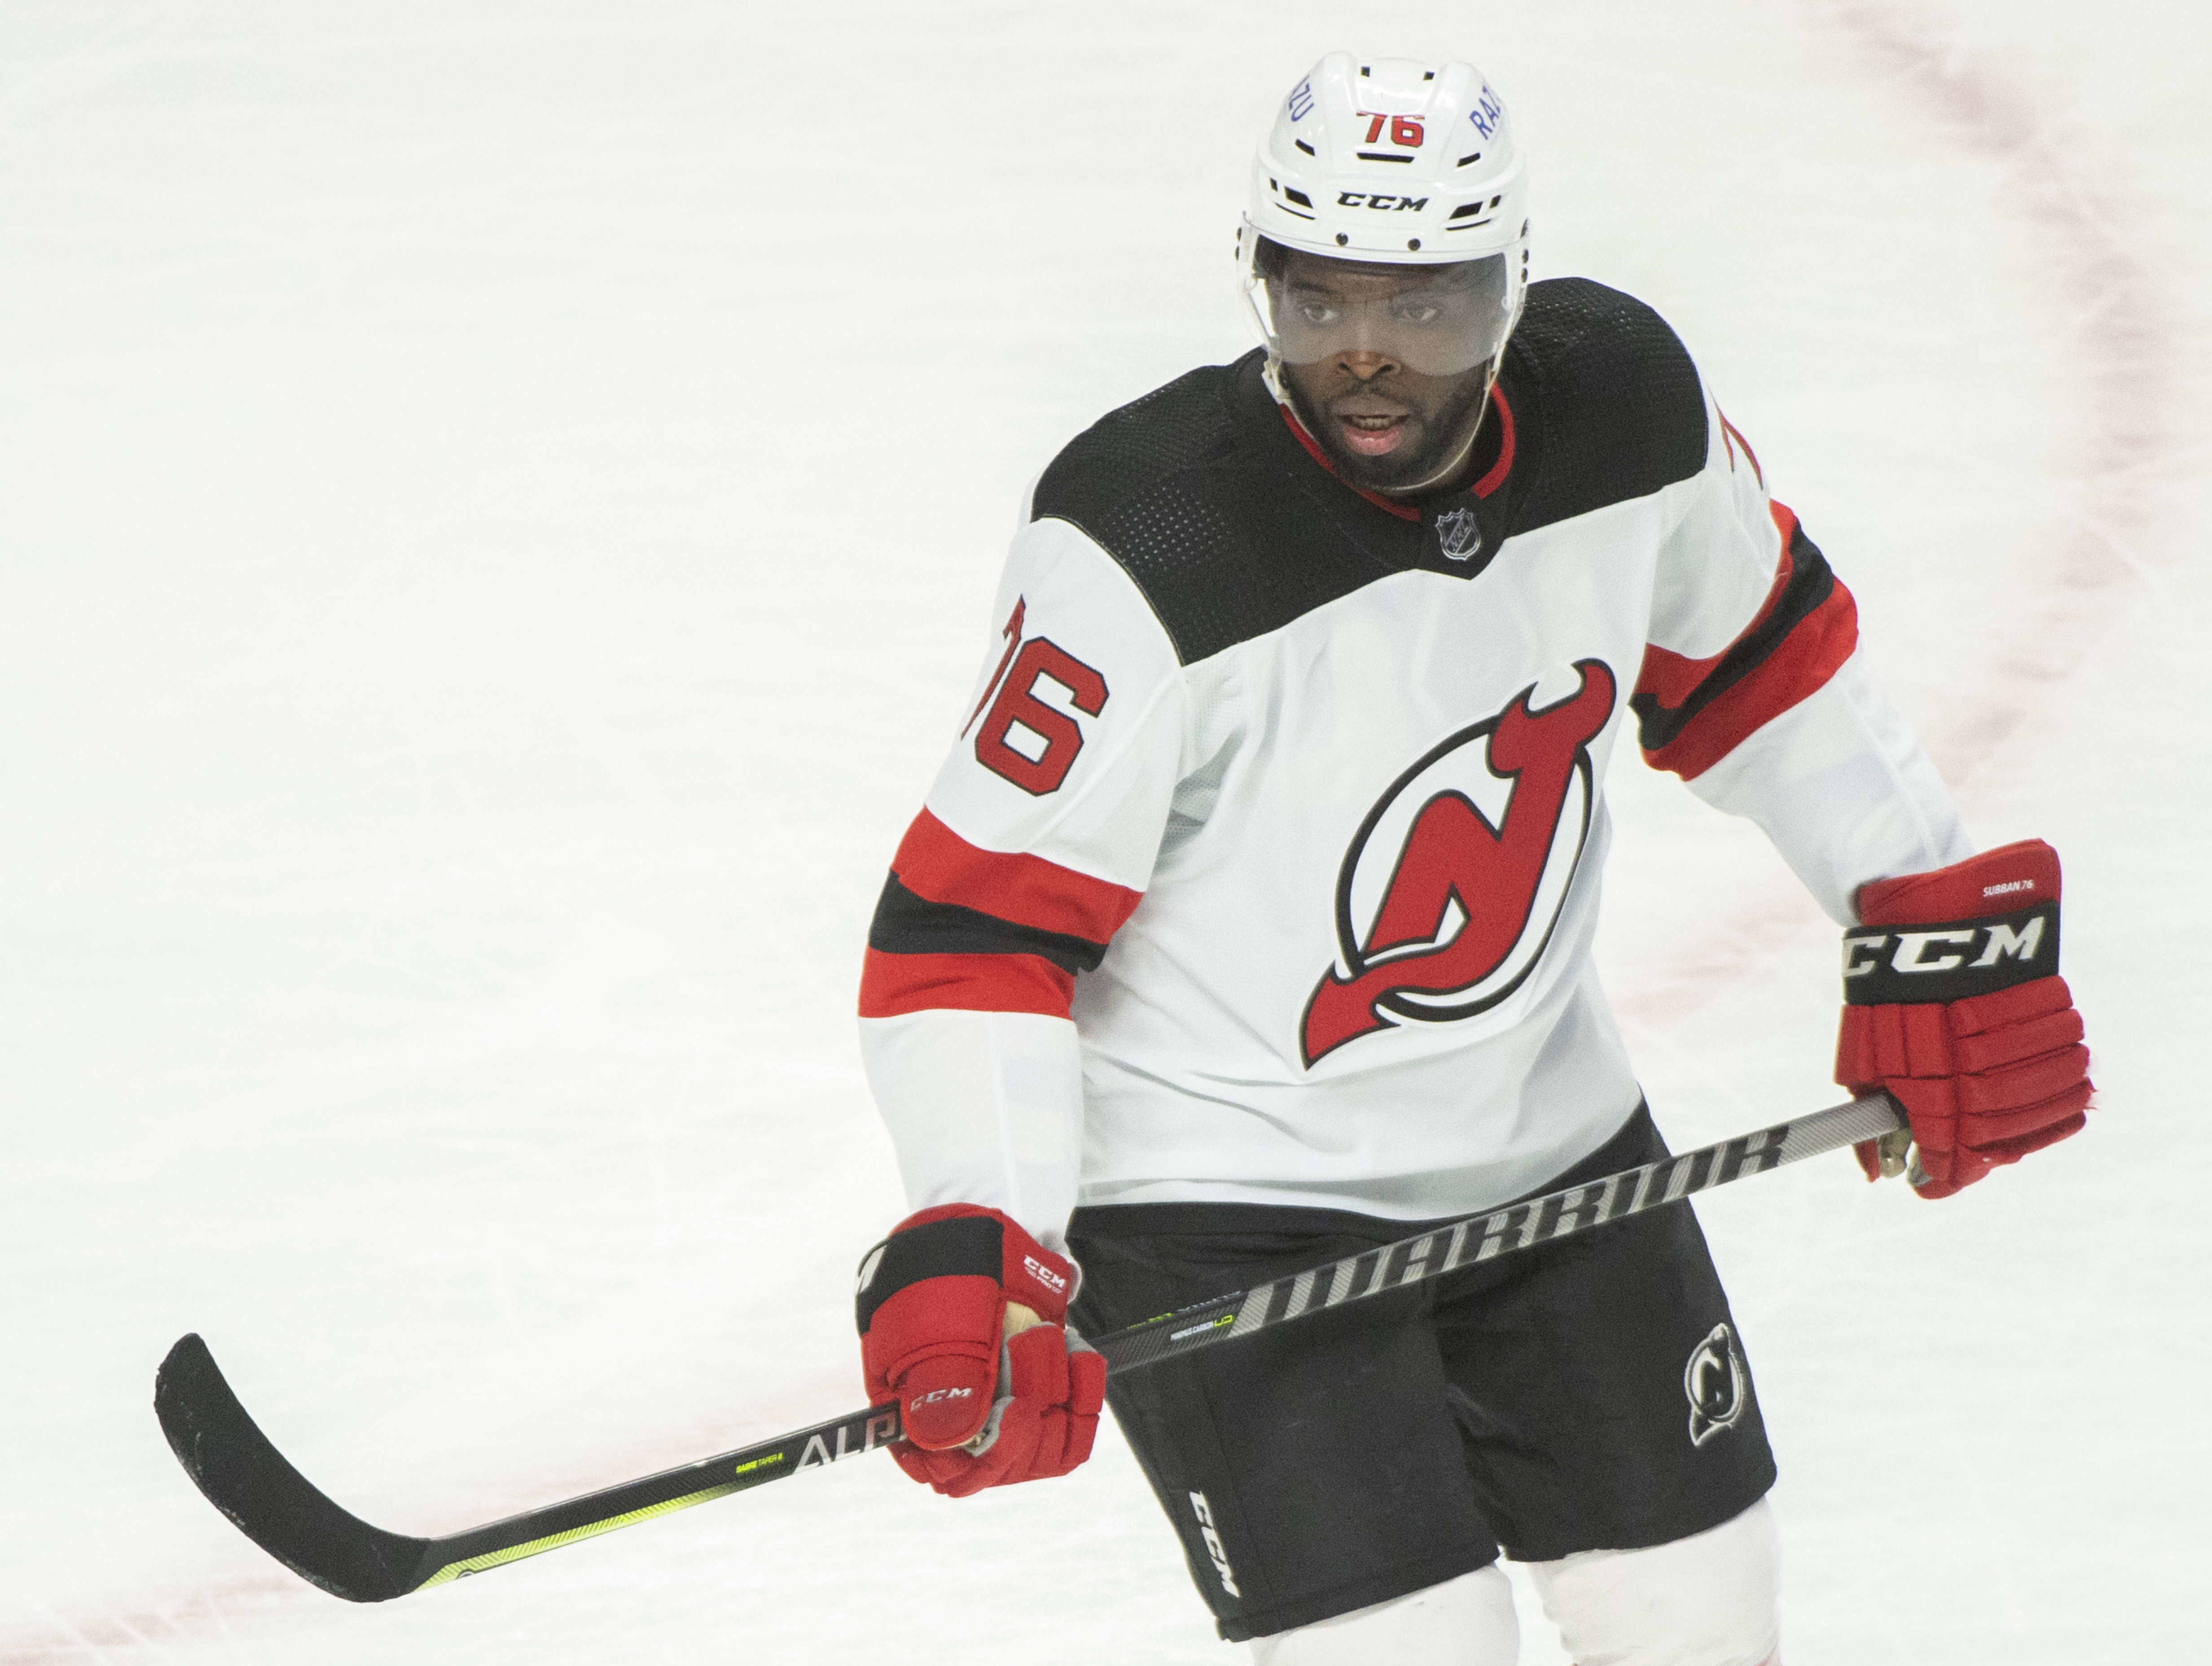 The End of This Chapter is Closing;” P.K. Subban Retires - All